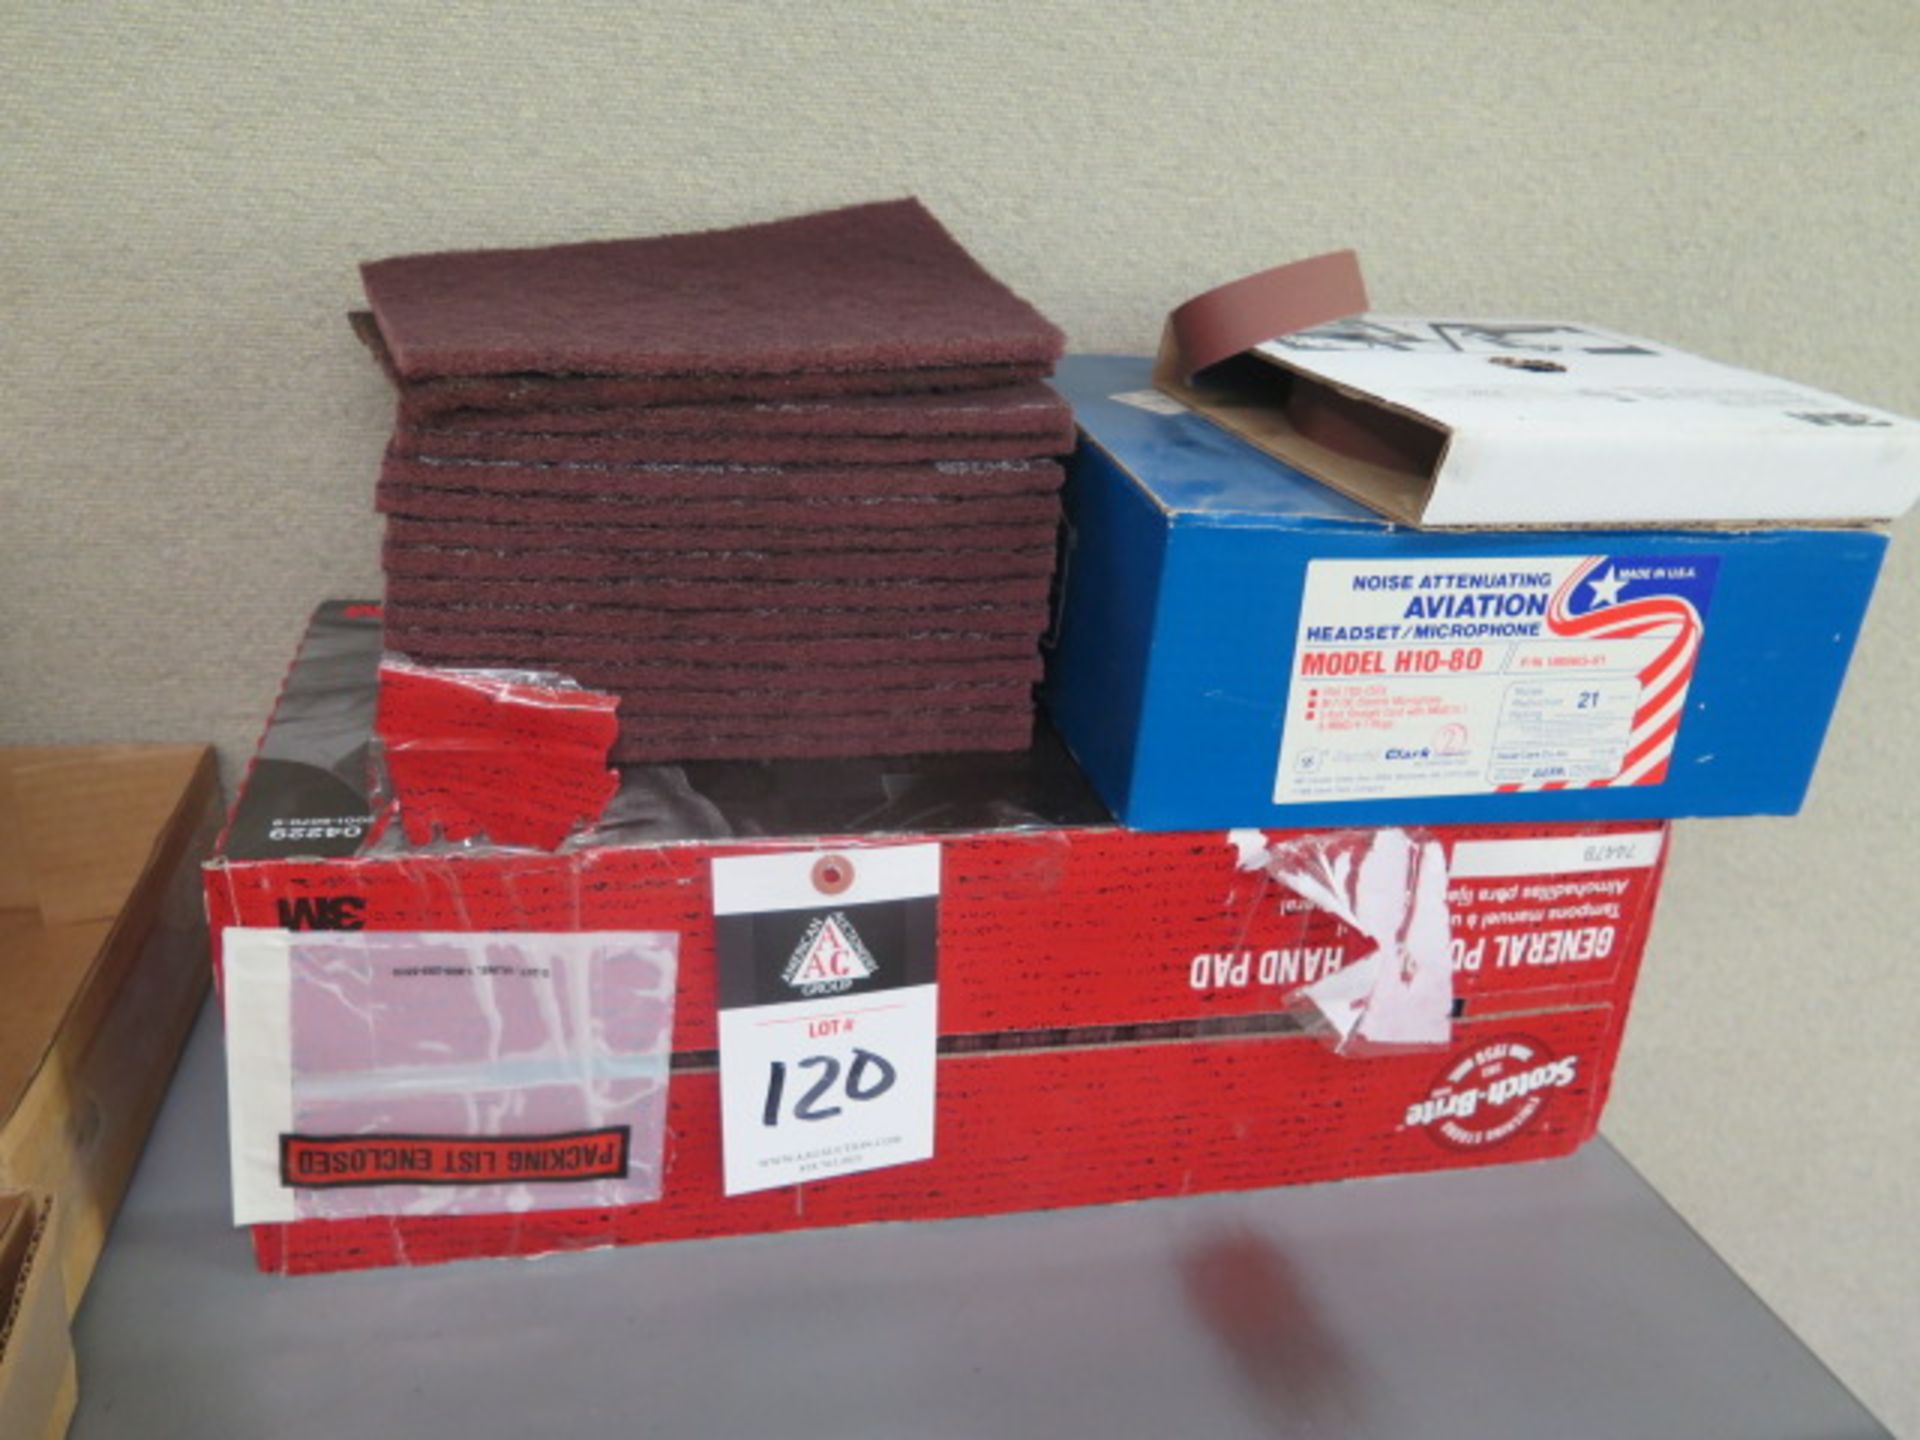 Scotch-Brite Pads and Sand Paper (SOLD AS-IS - NO WARRANTY)